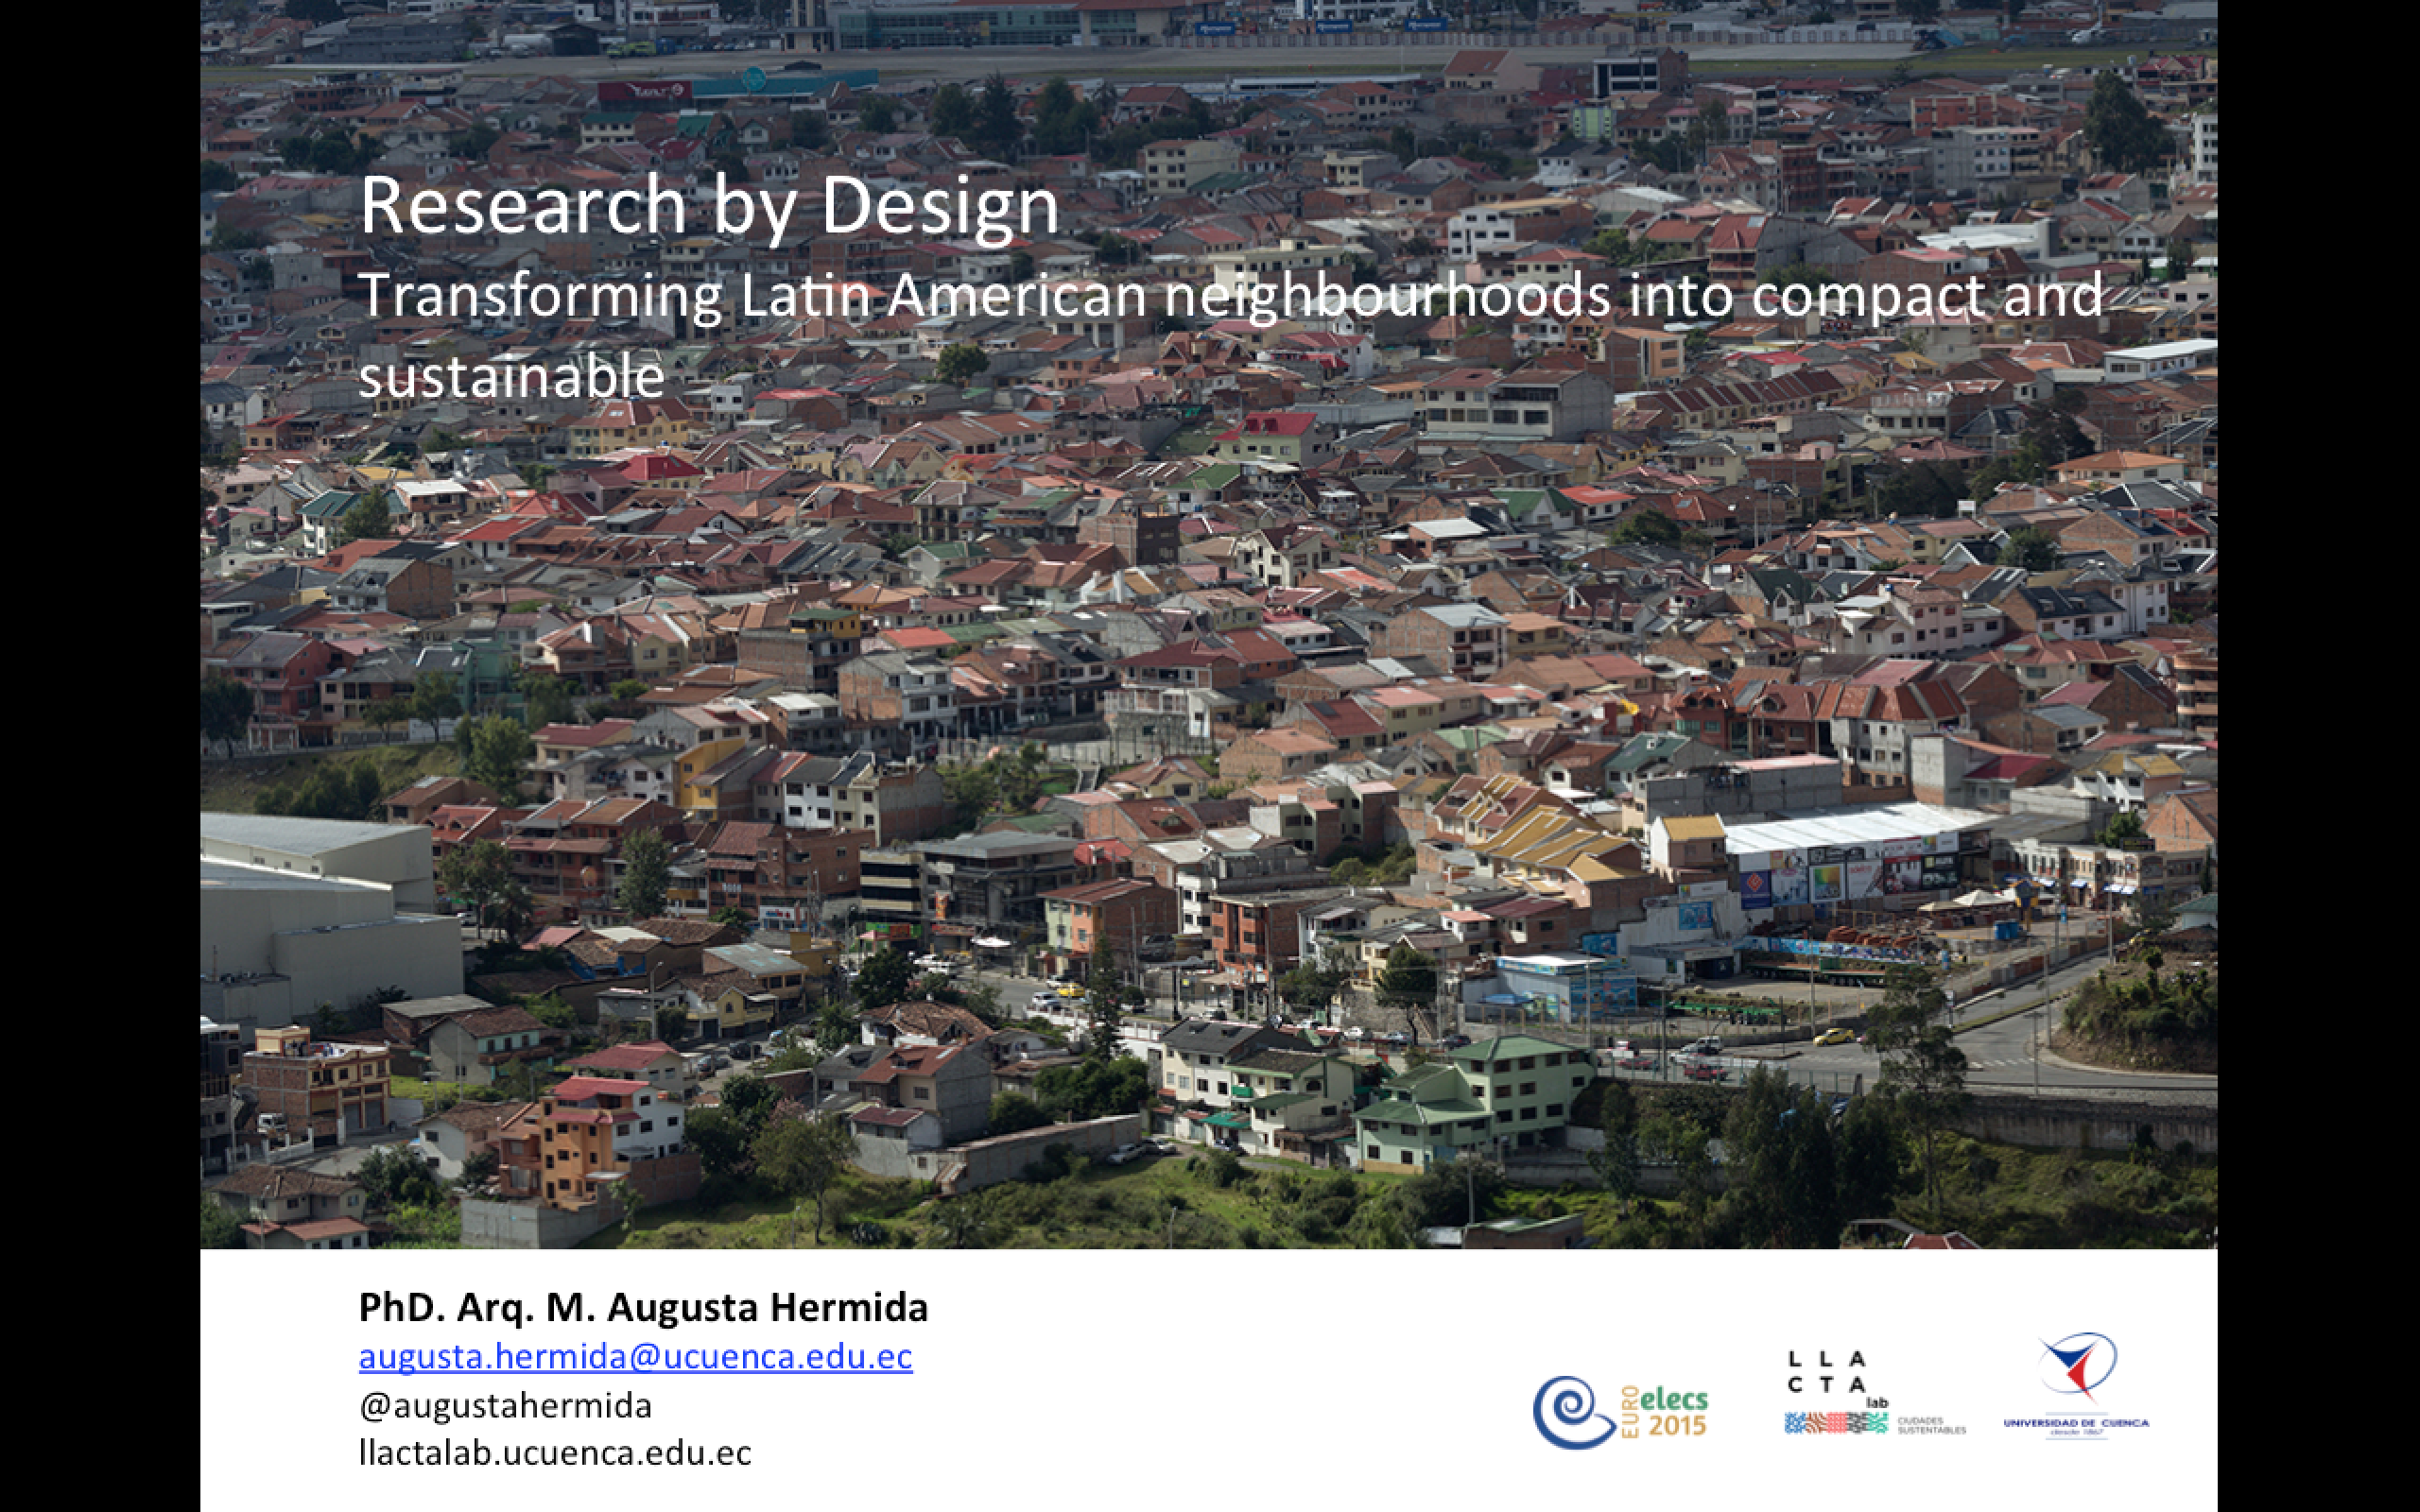 Research by Design: Transforming Latin American neighbourhoods into compact and sustainable